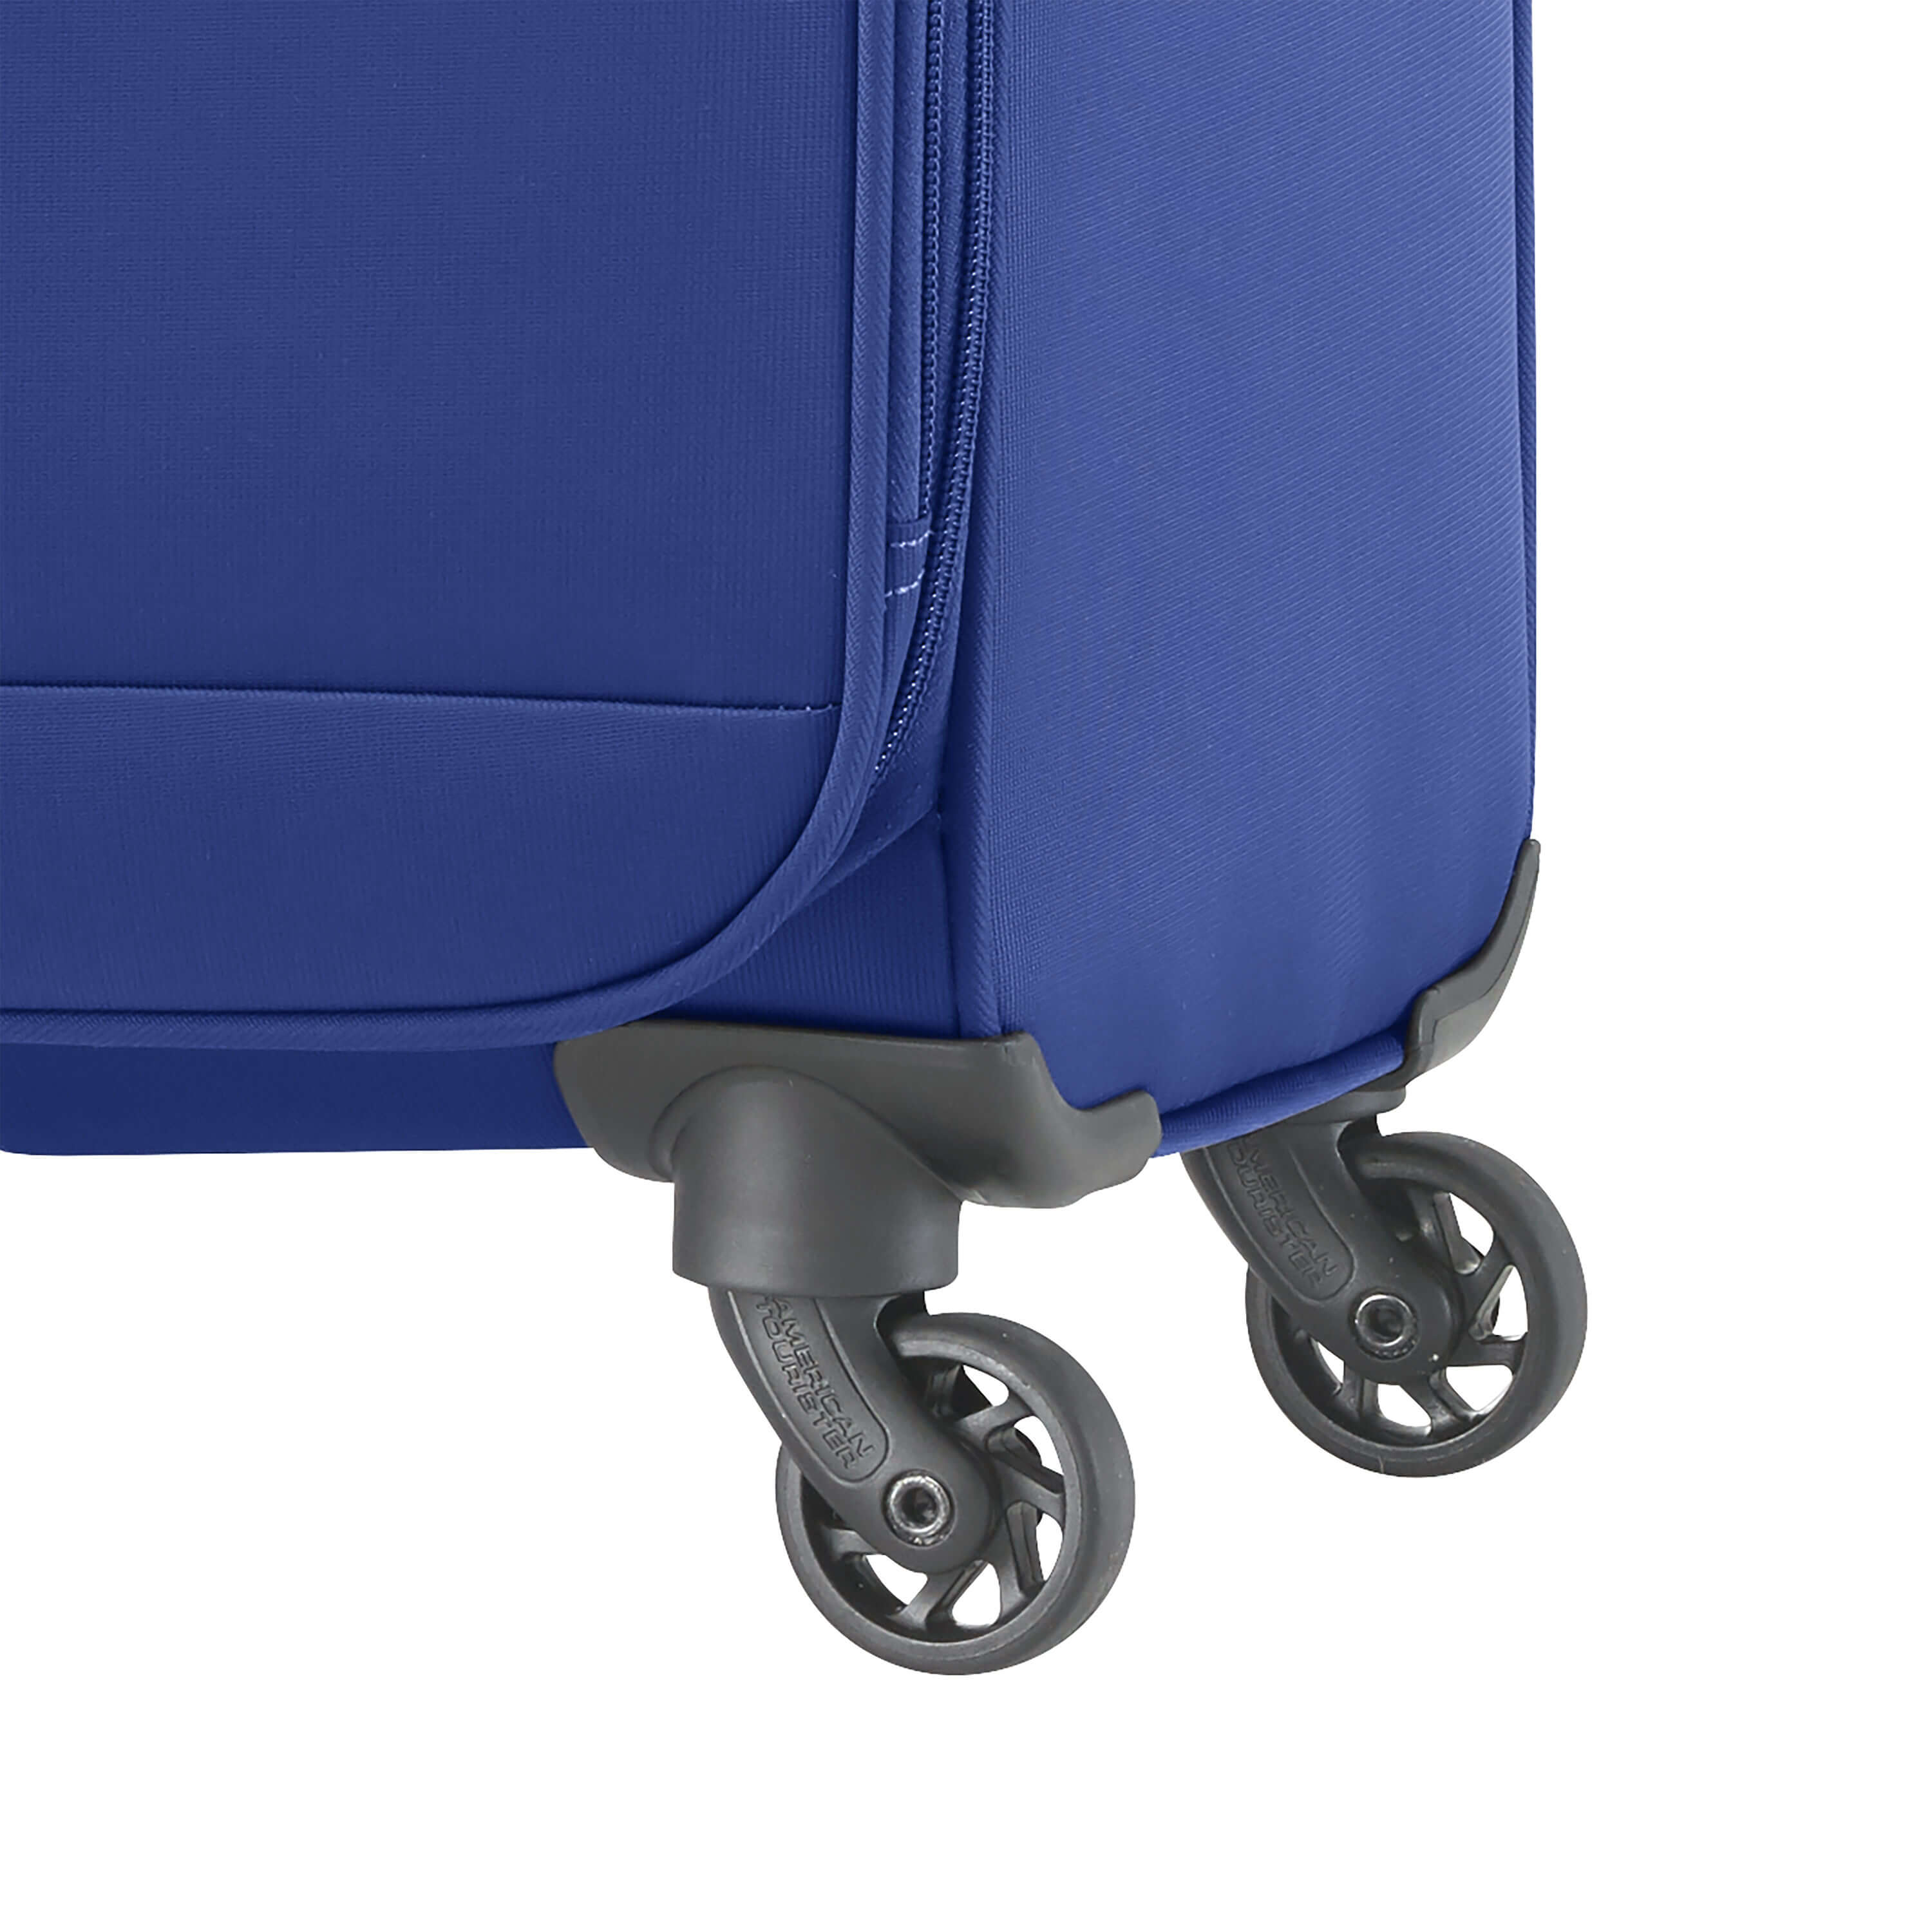 Tourister Bayview Spinner Large luggage with tsa lock | Mr Valisier Luggage and Accessories